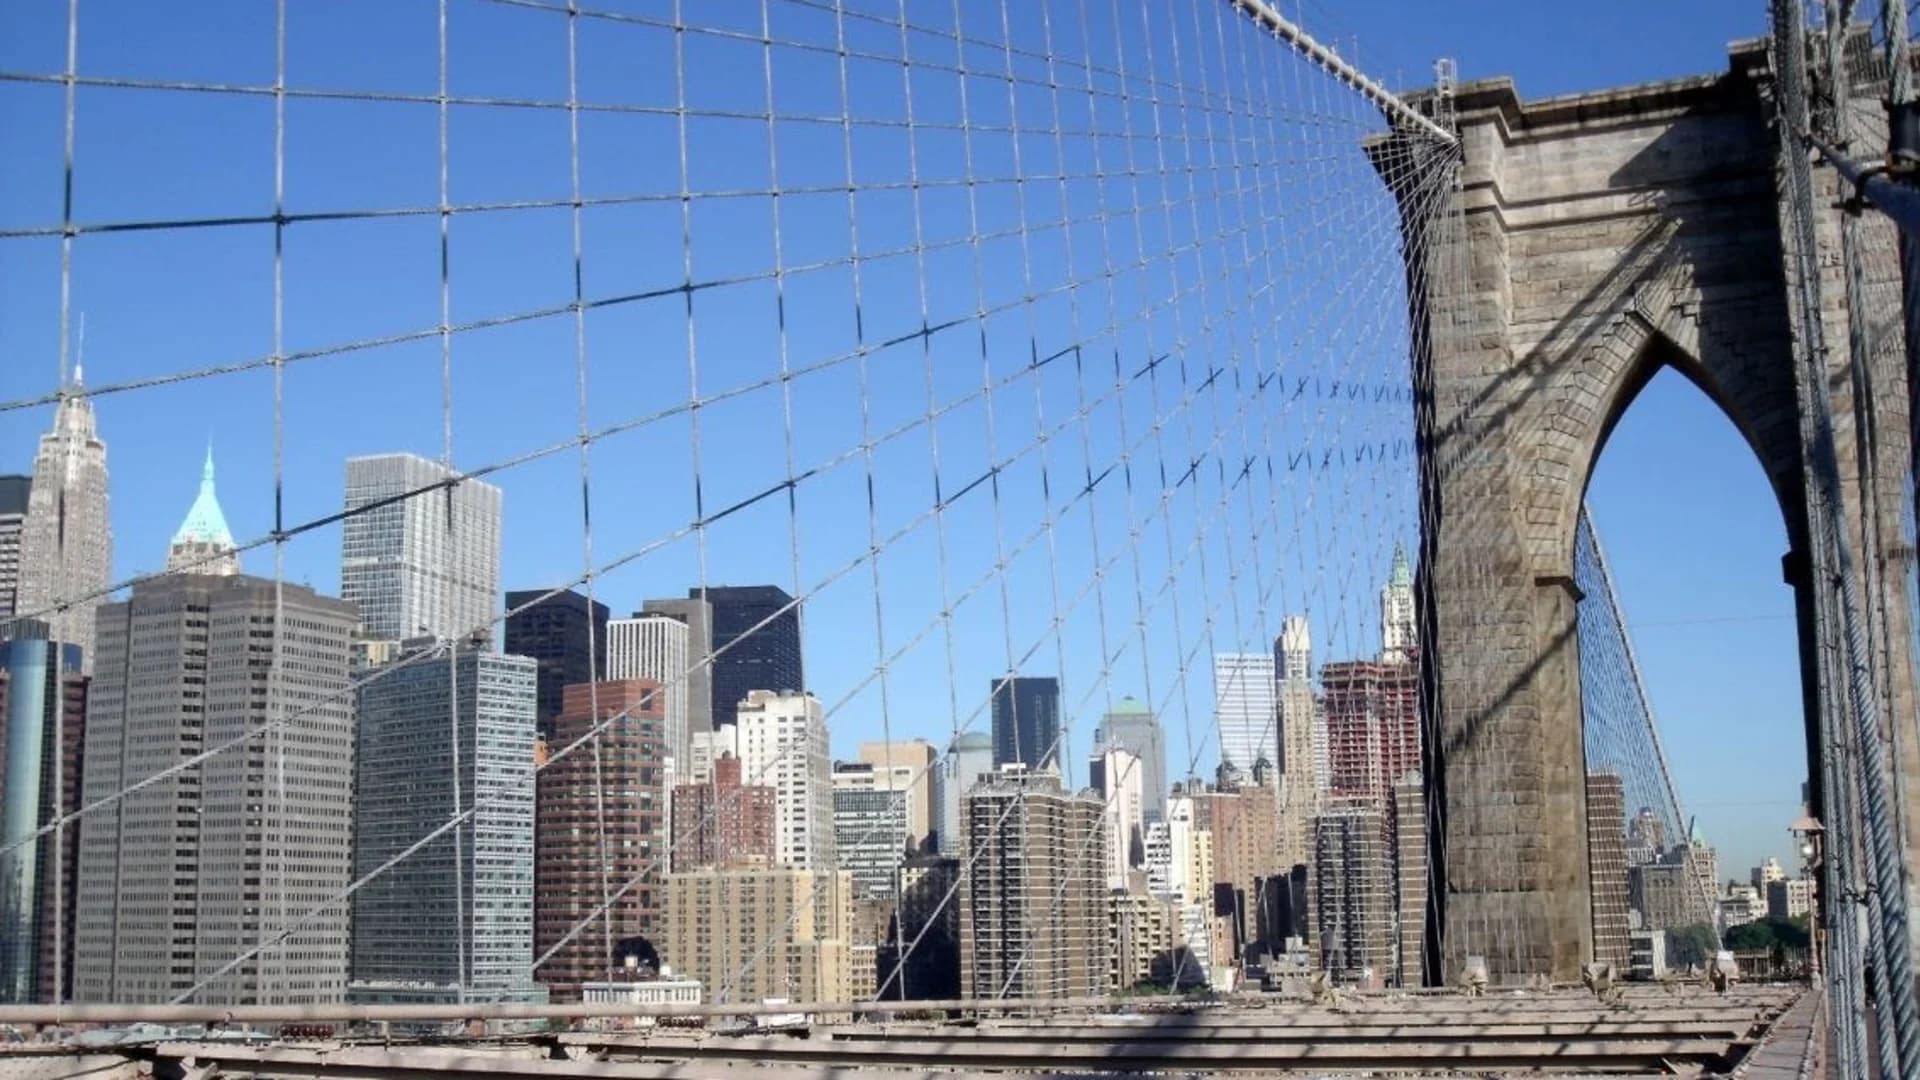 NYC among top 5 travel destinations in new survey